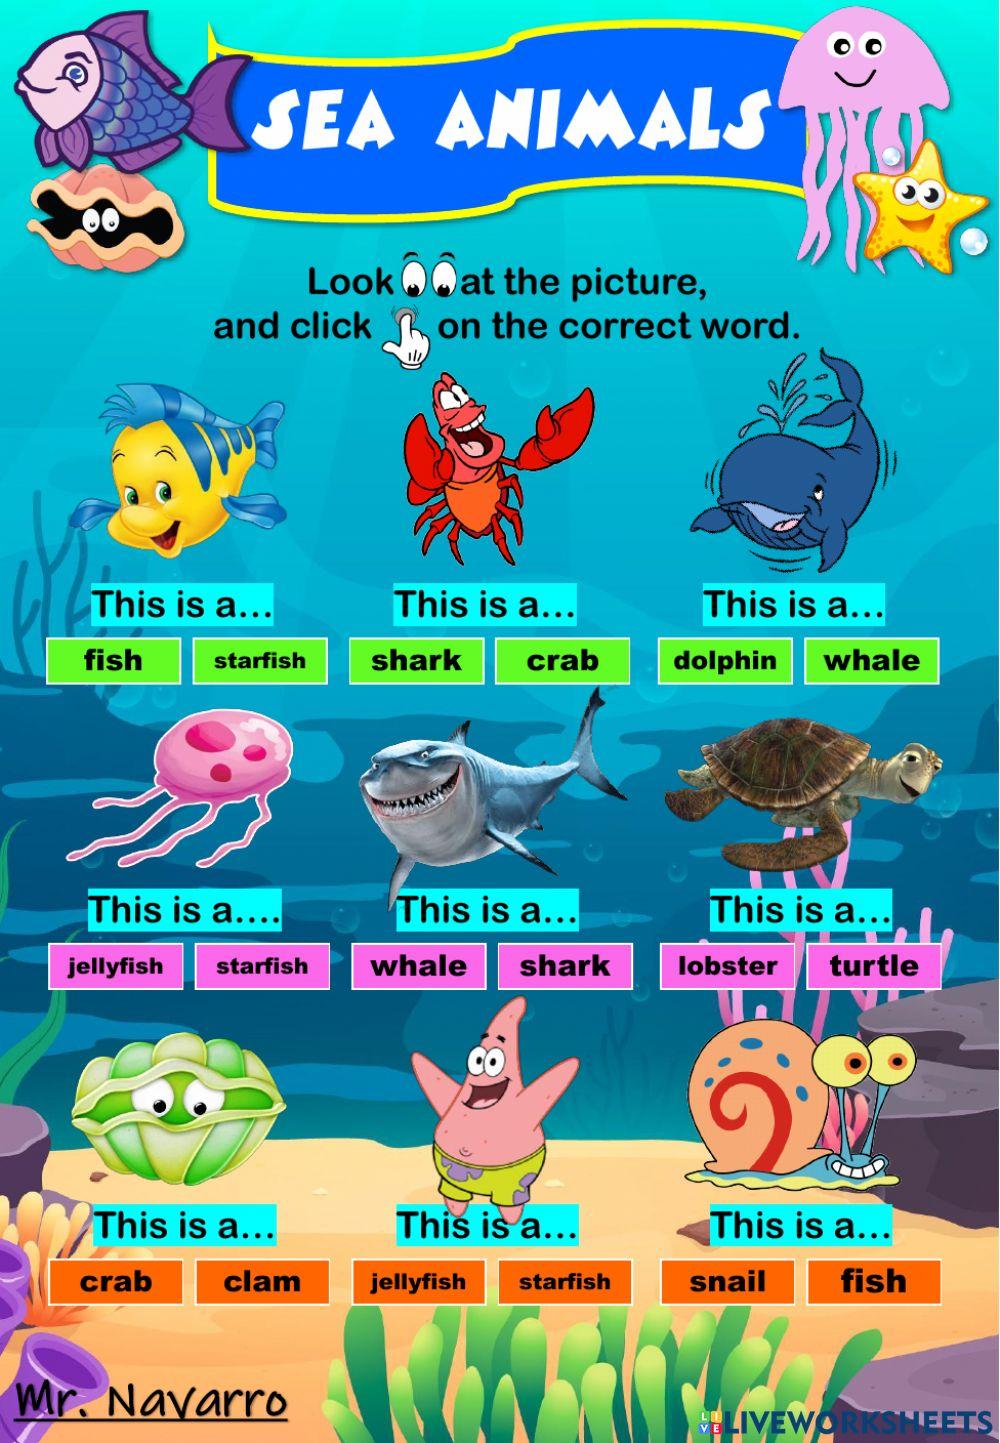 Sea Animals (Look at the picture and click on the correct word)